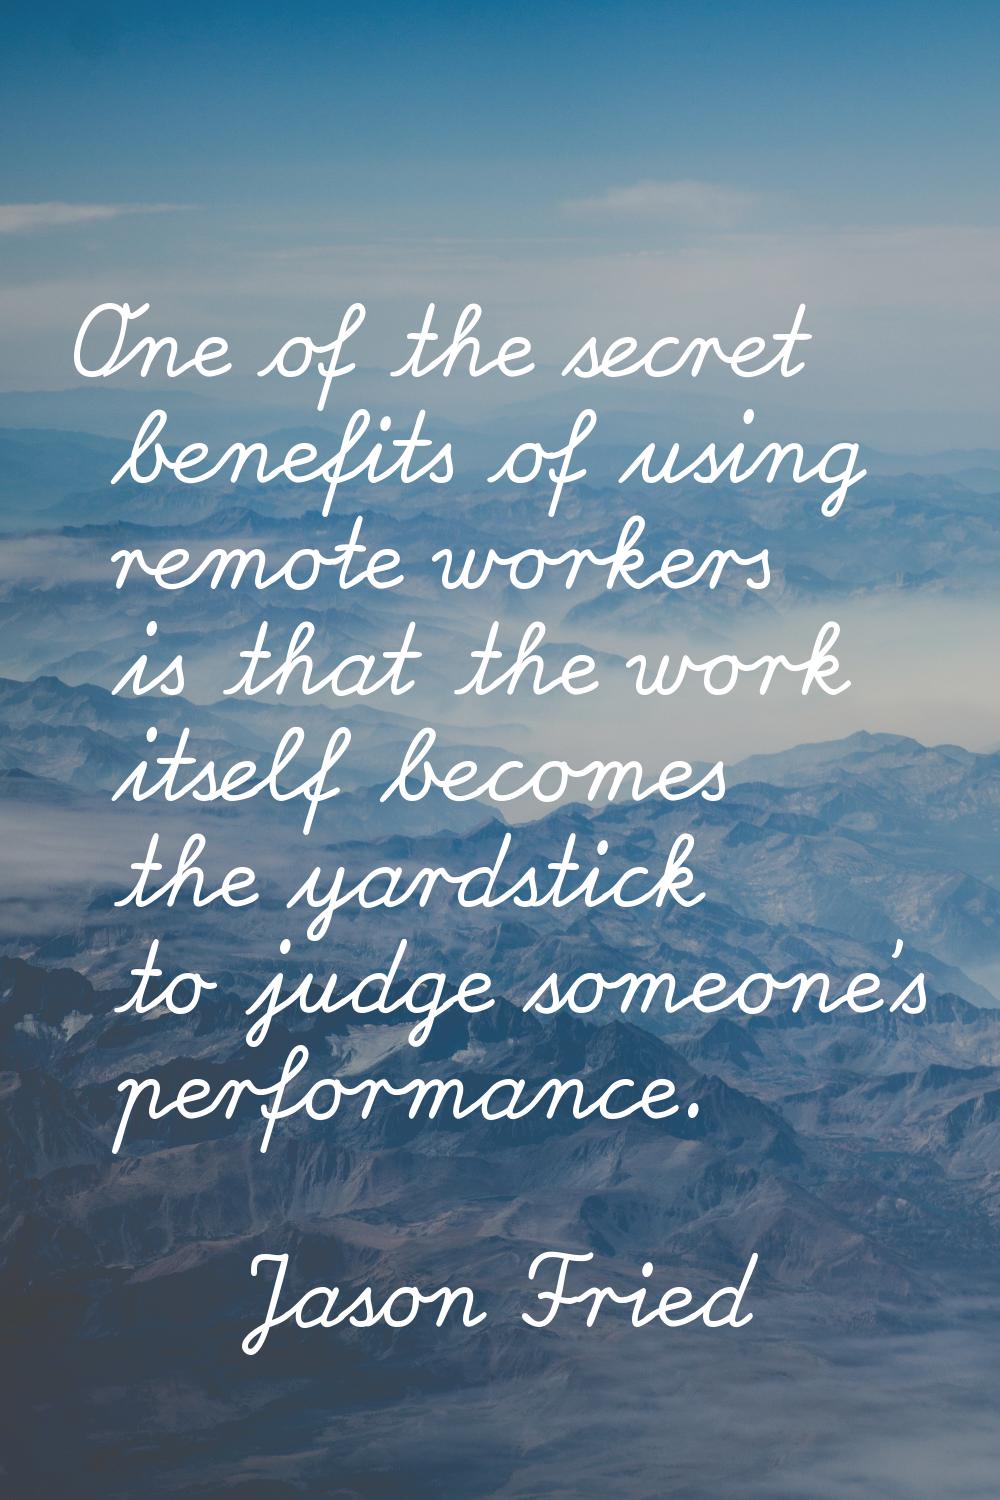 One of the secret benefits of using remote workers is that the work itself becomes the yardstick to